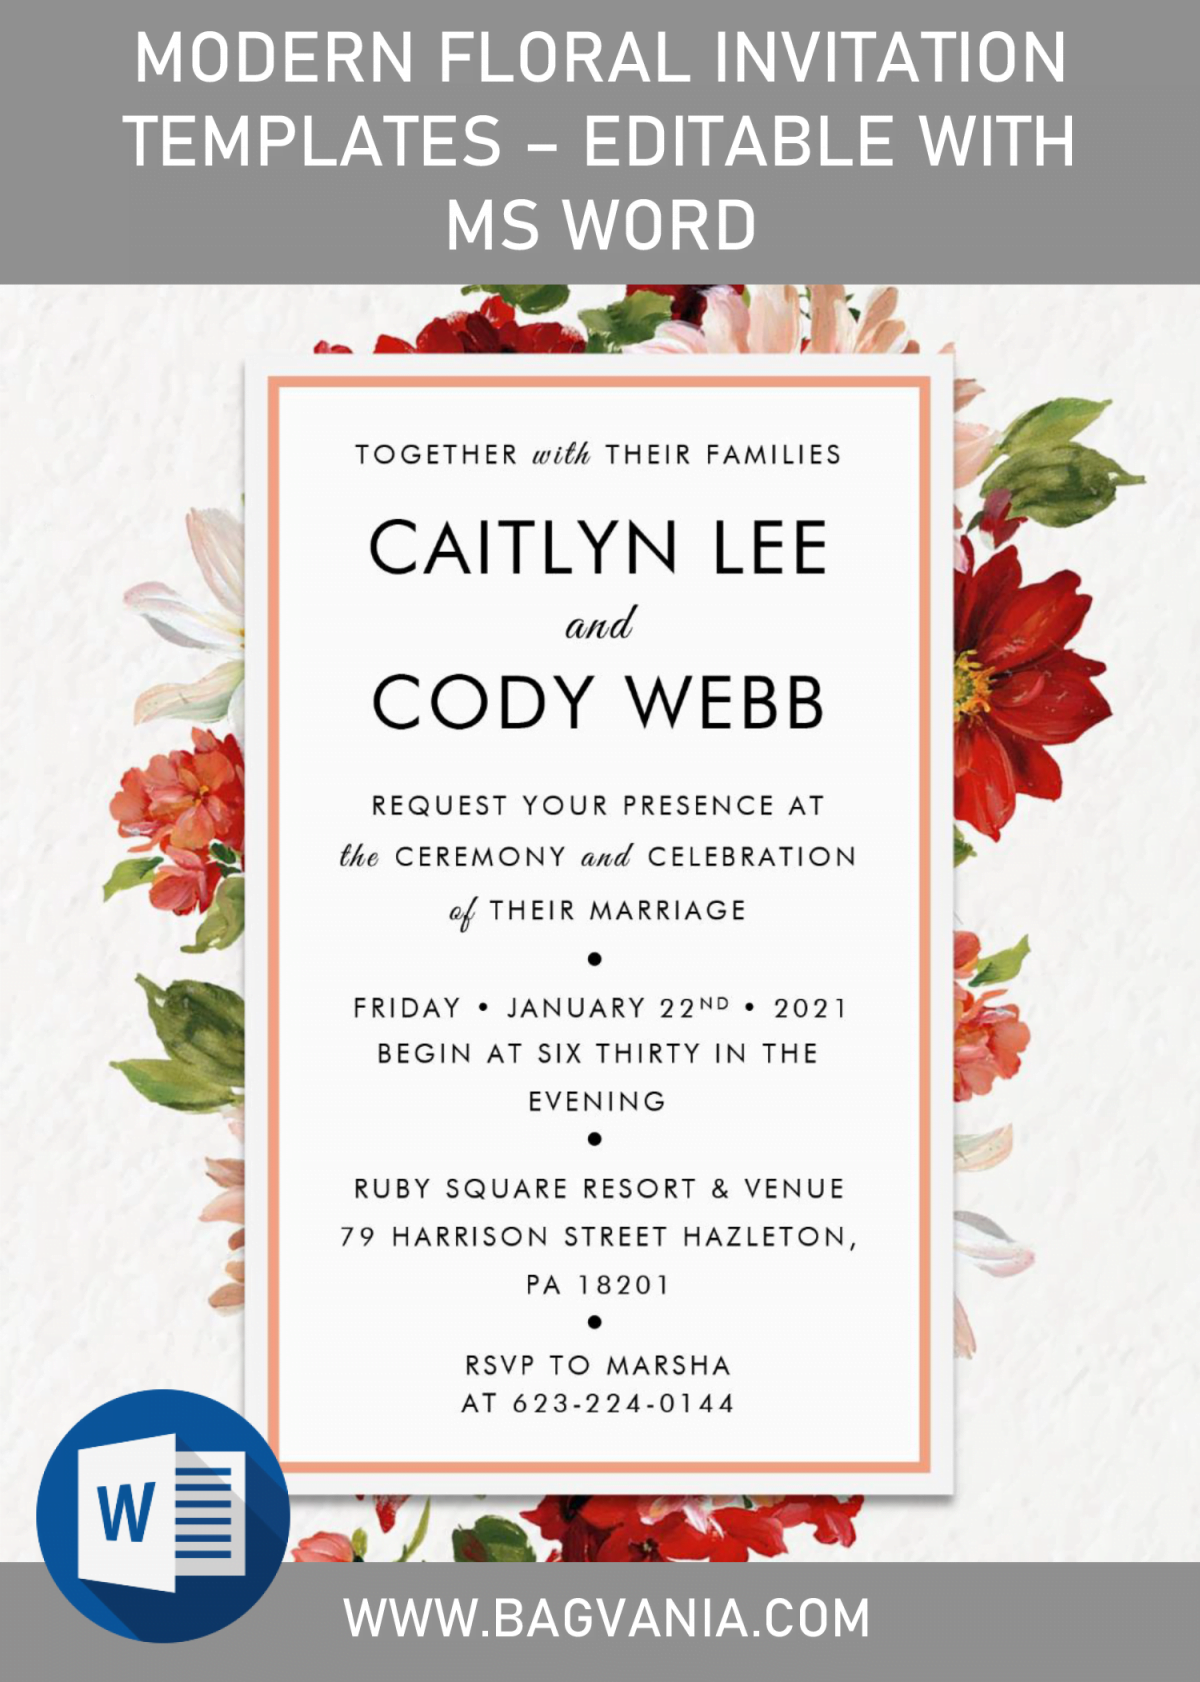 Modern Floral Invitation Templates - Editable With MS Word